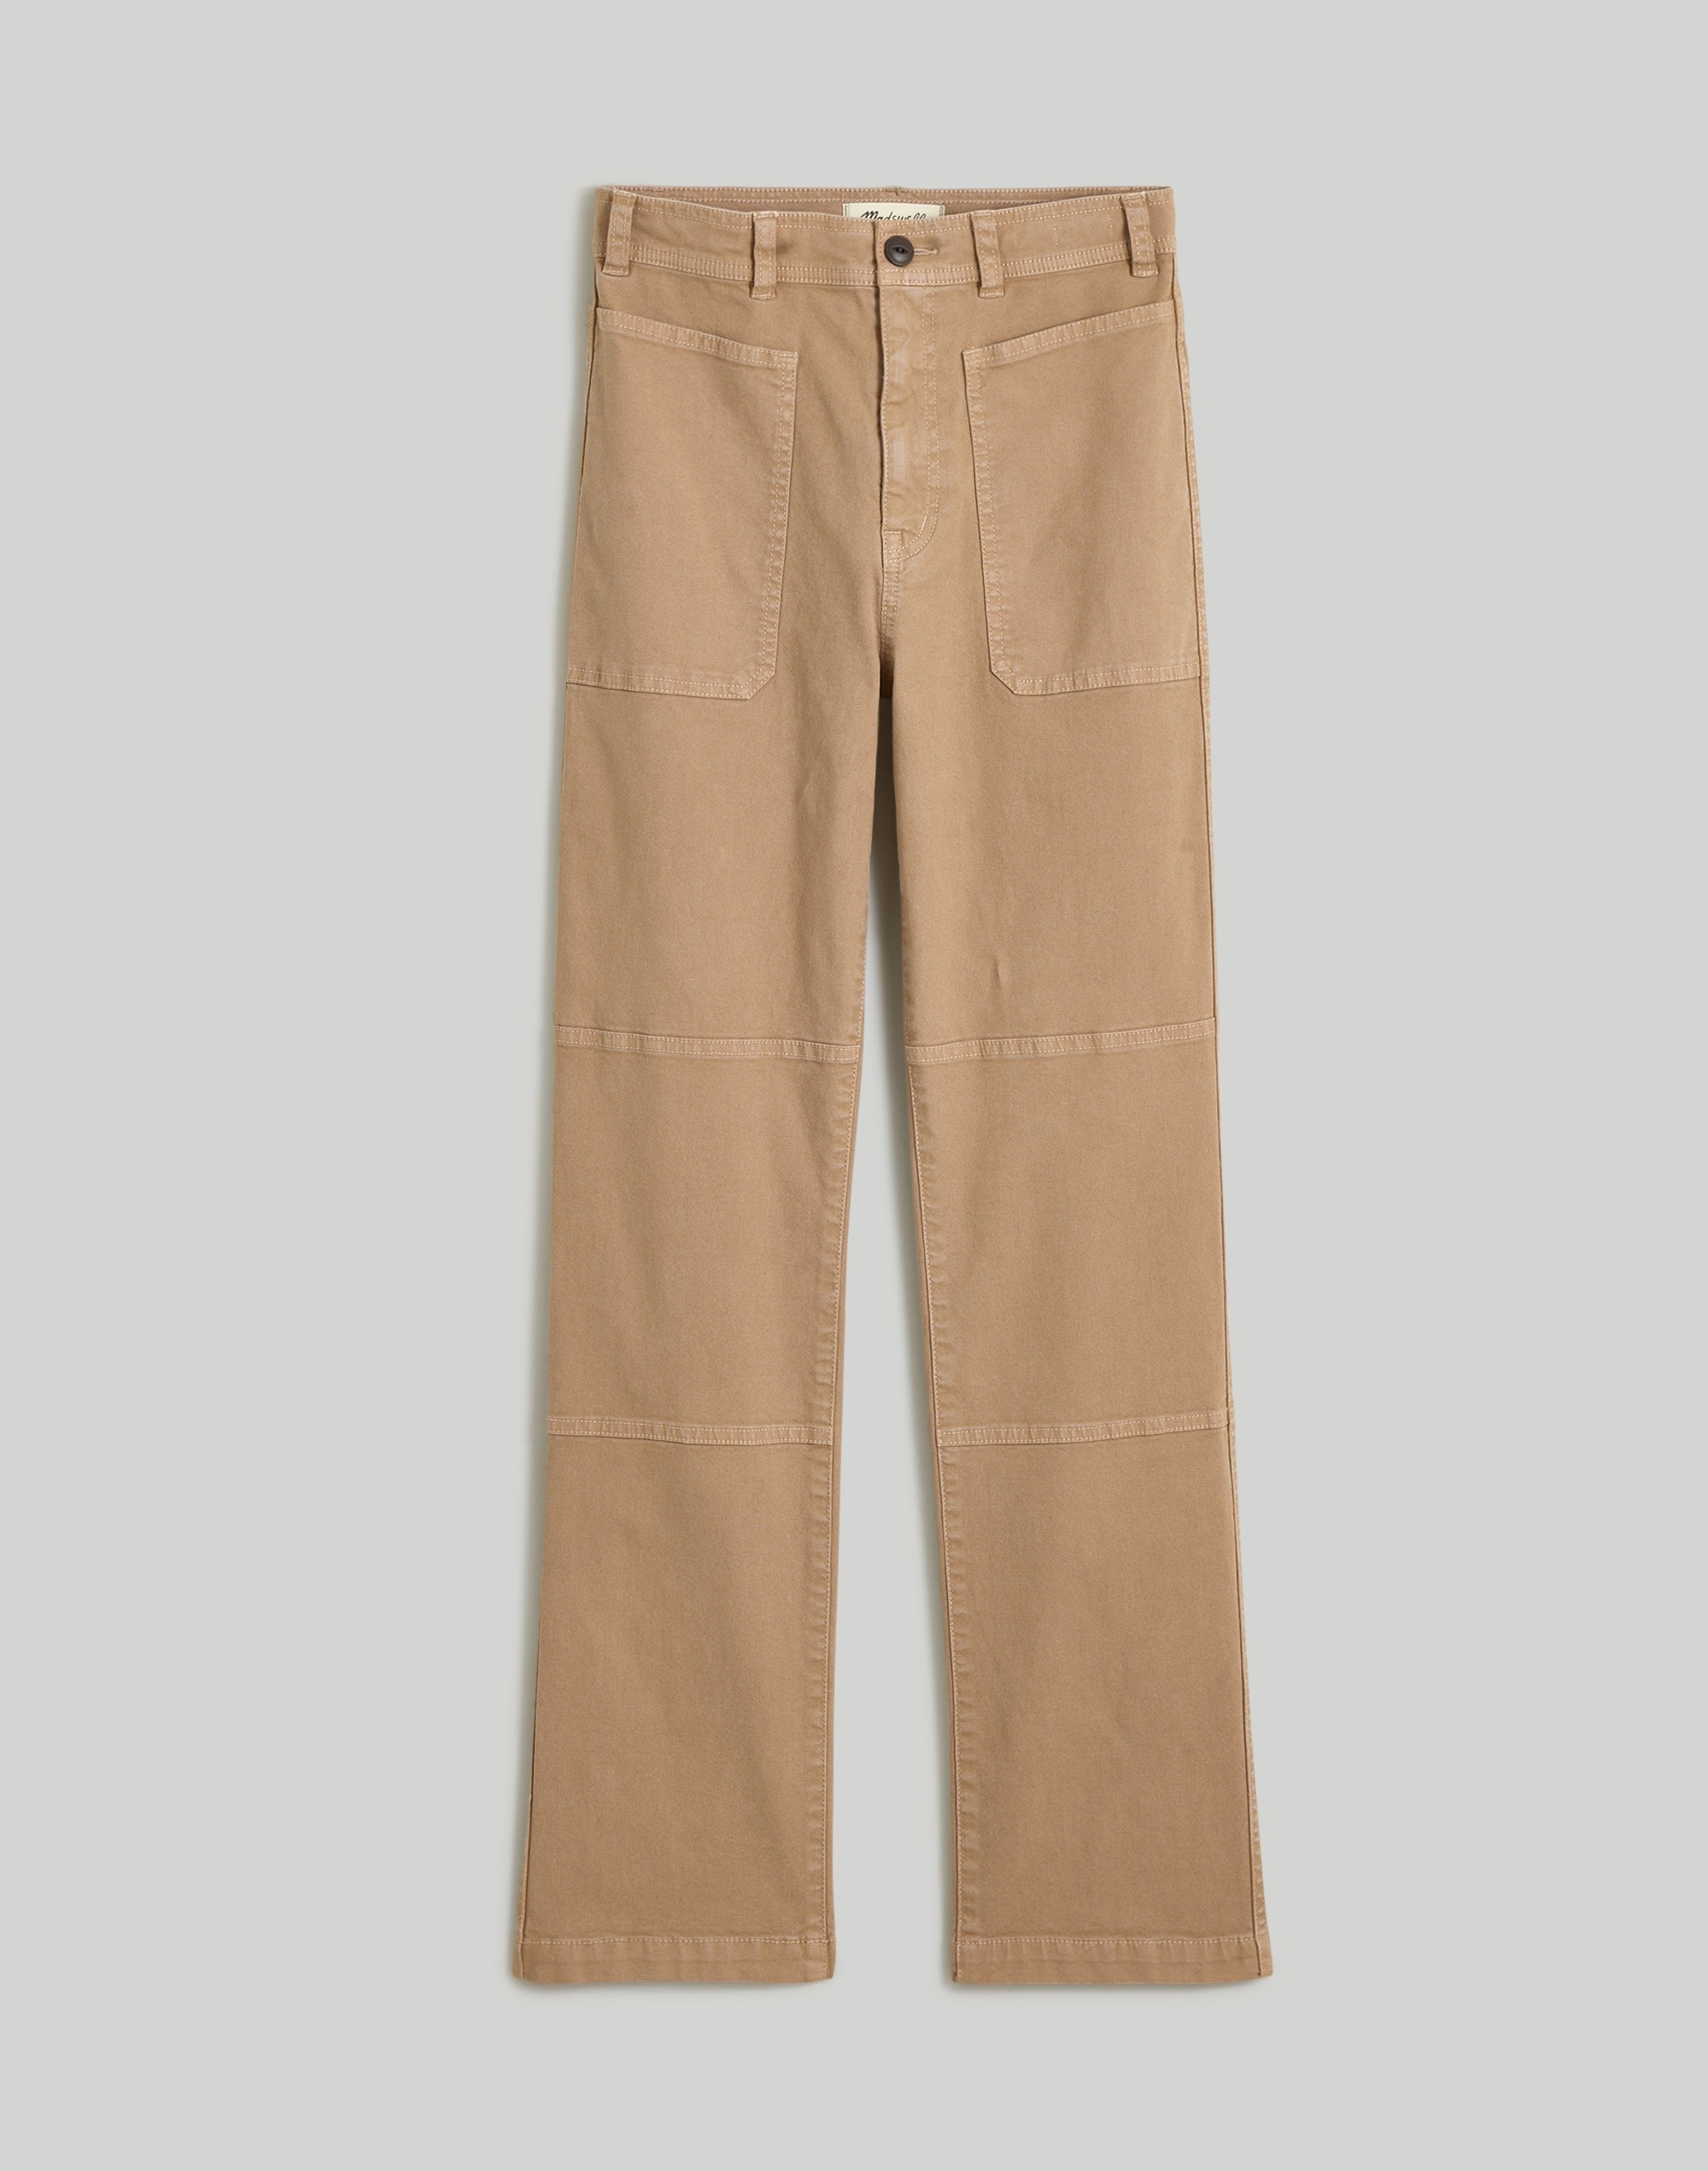 The Plus '90s Straight Cargo Pant in Garment-Dyed Canvas